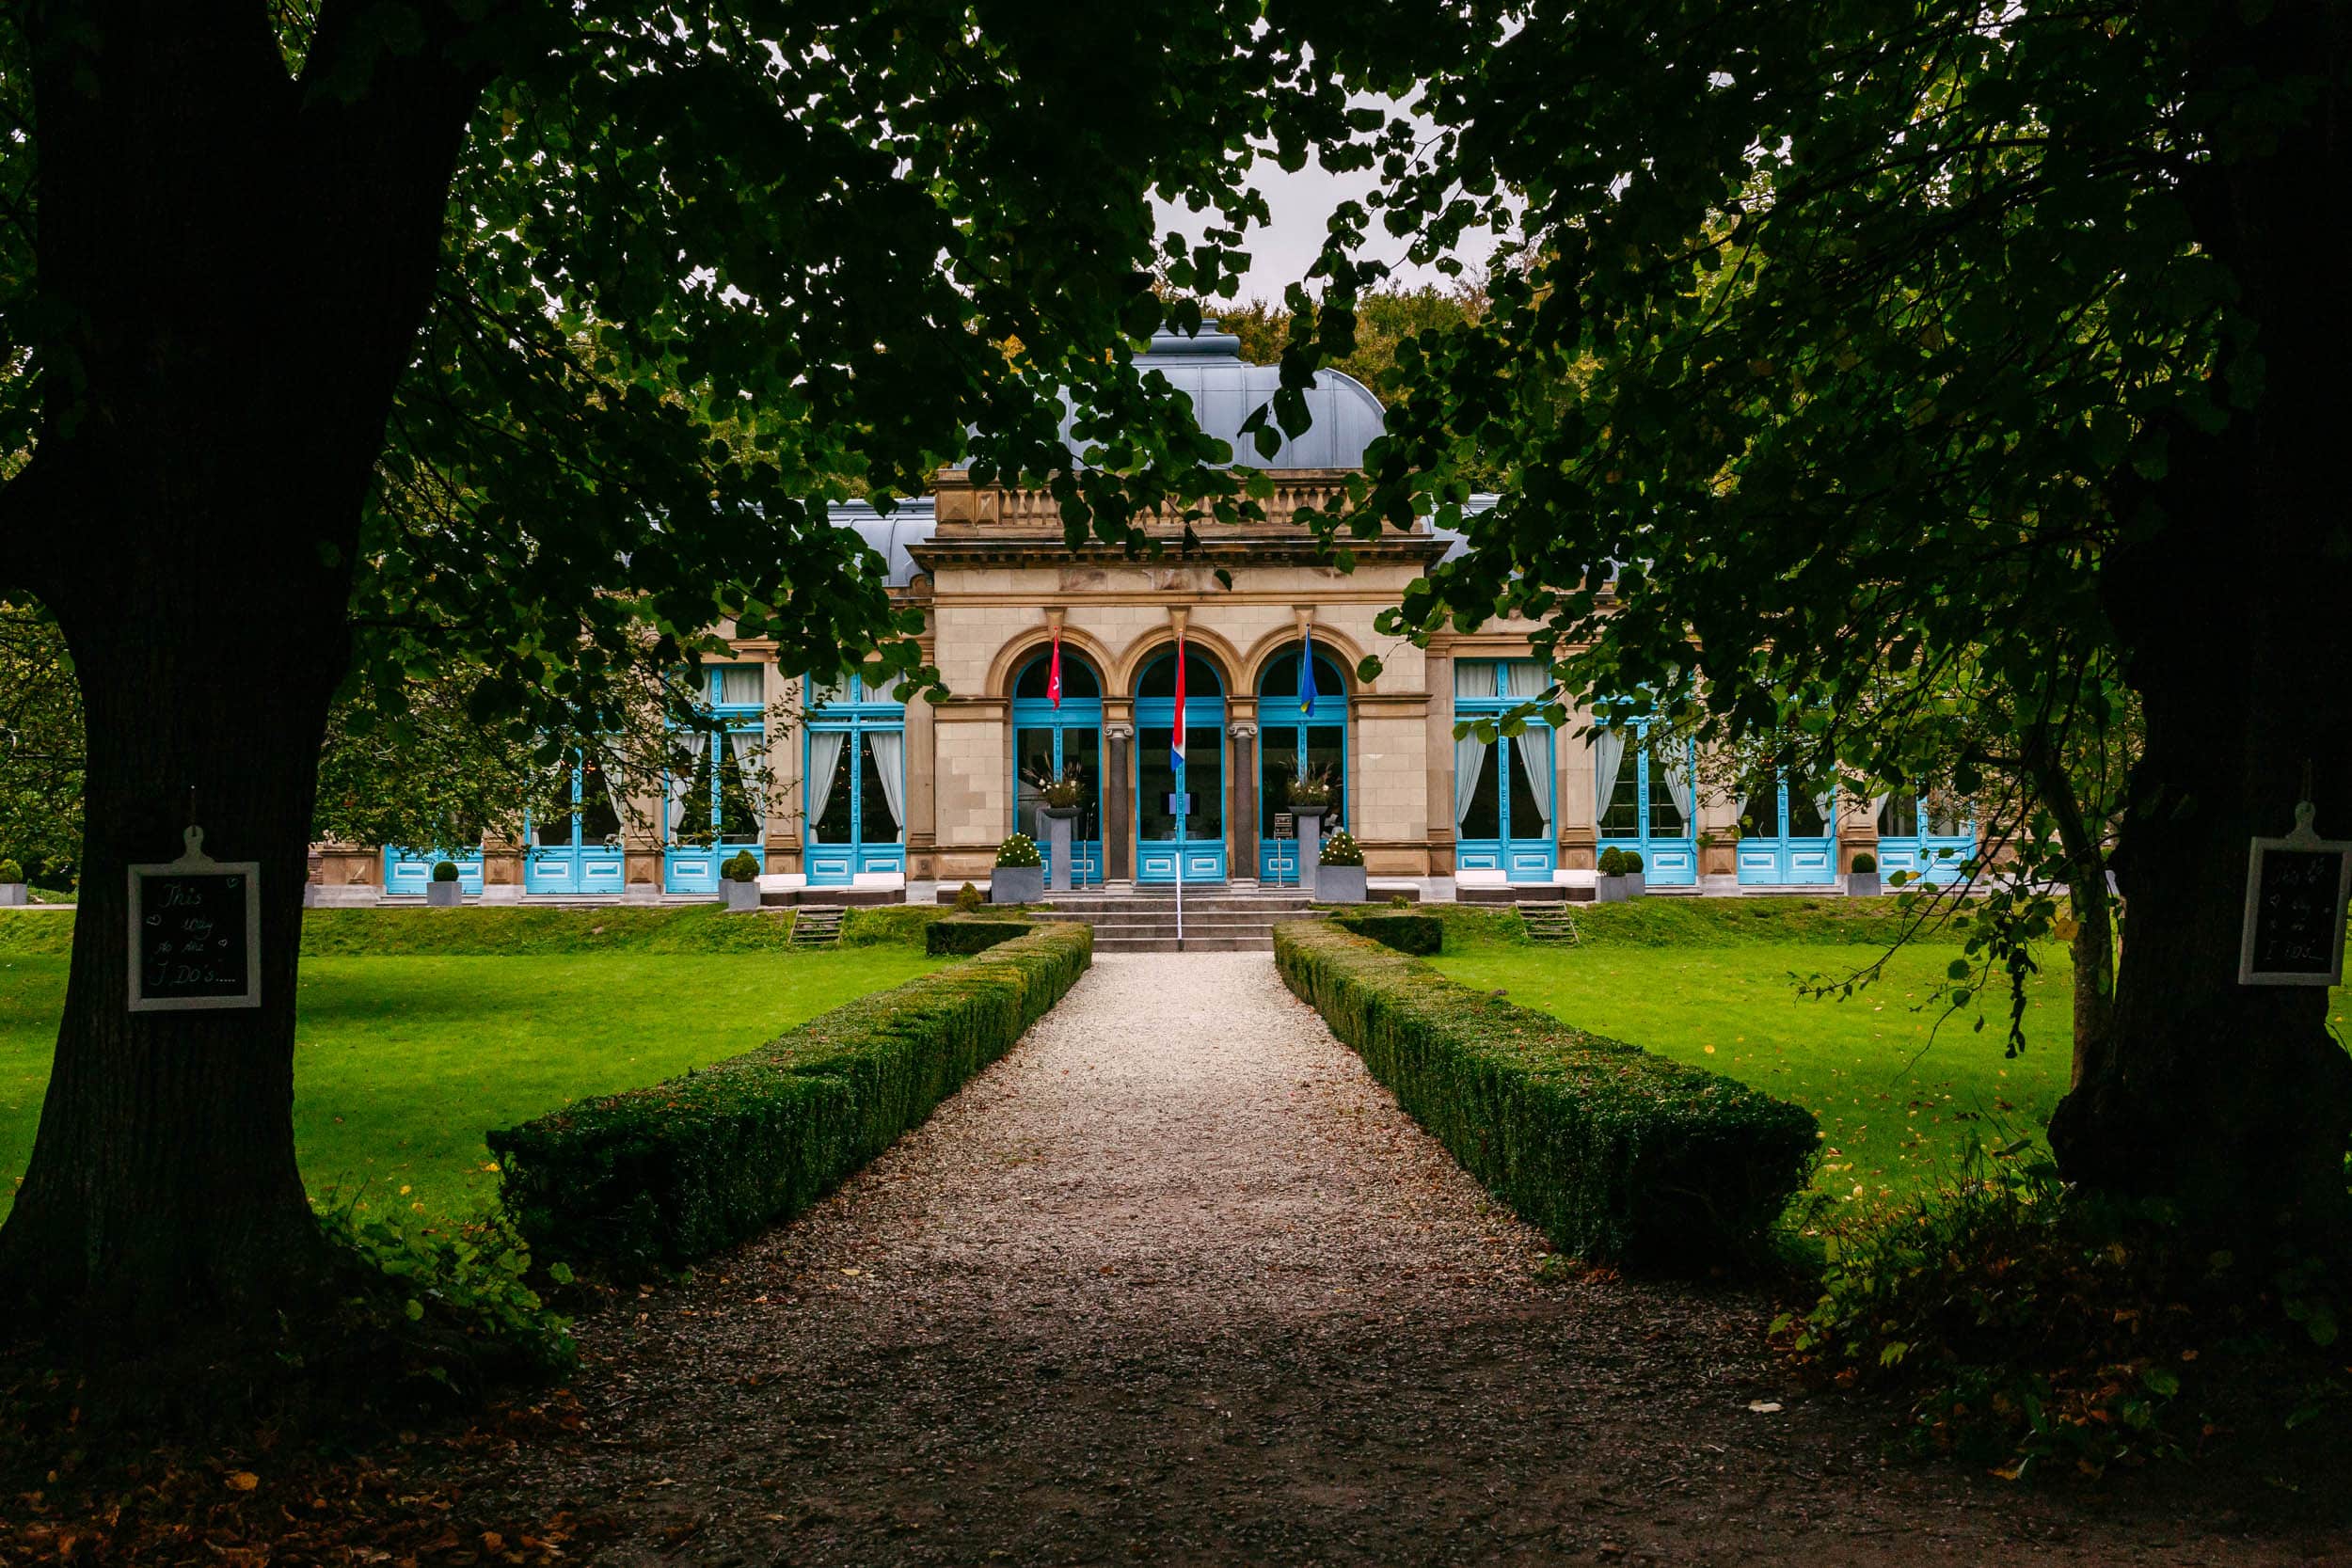 A path leading to a large building with blue doors called Orangerie Elswout.